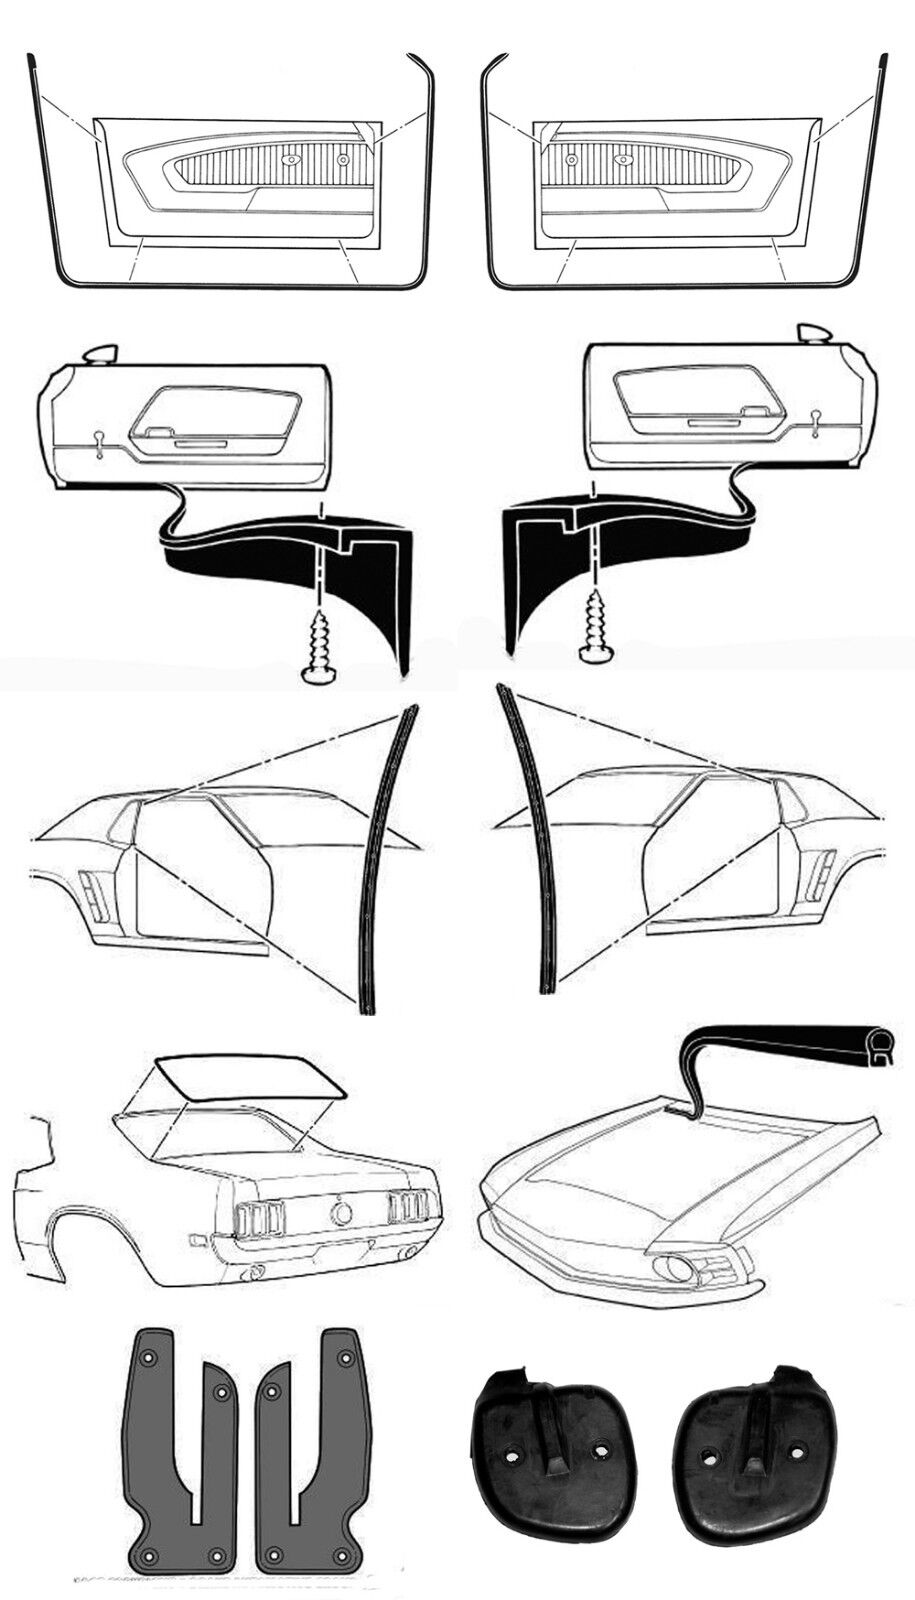 NEW 1969 Mustang Deluxe Weatherstrip Kit for Hardtop Coupe cars 15 pc Set